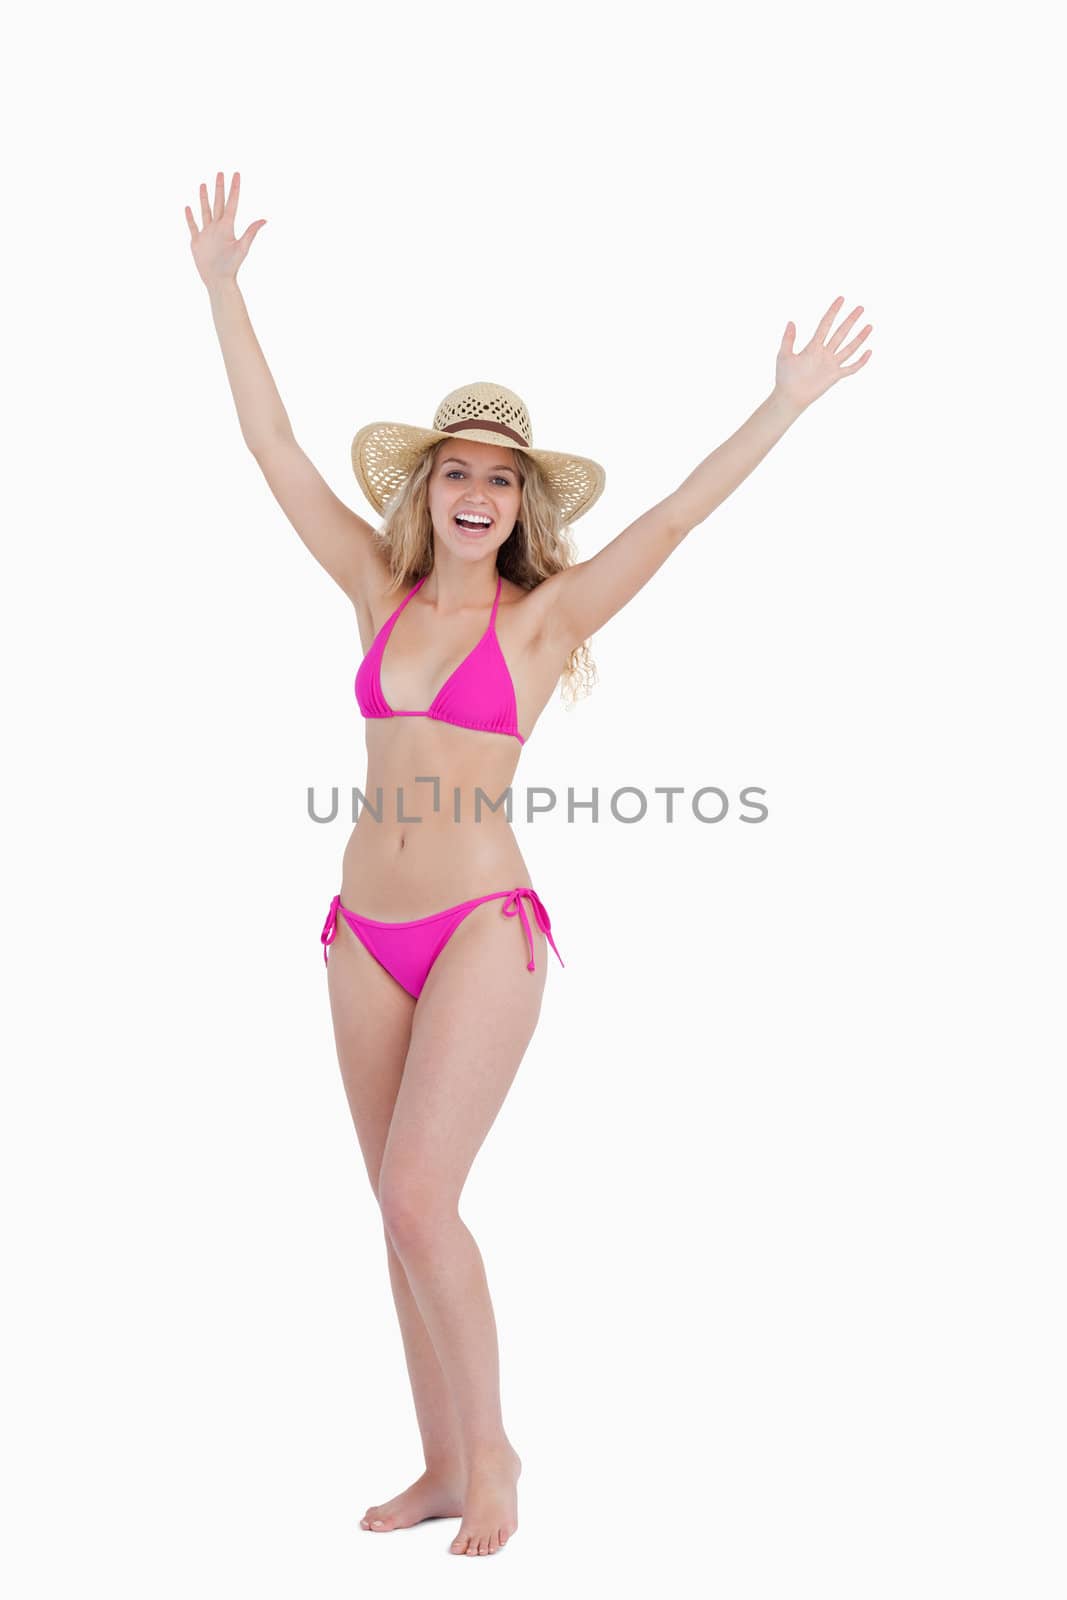 Blonde teenager raising her arms while standing upright against a white background